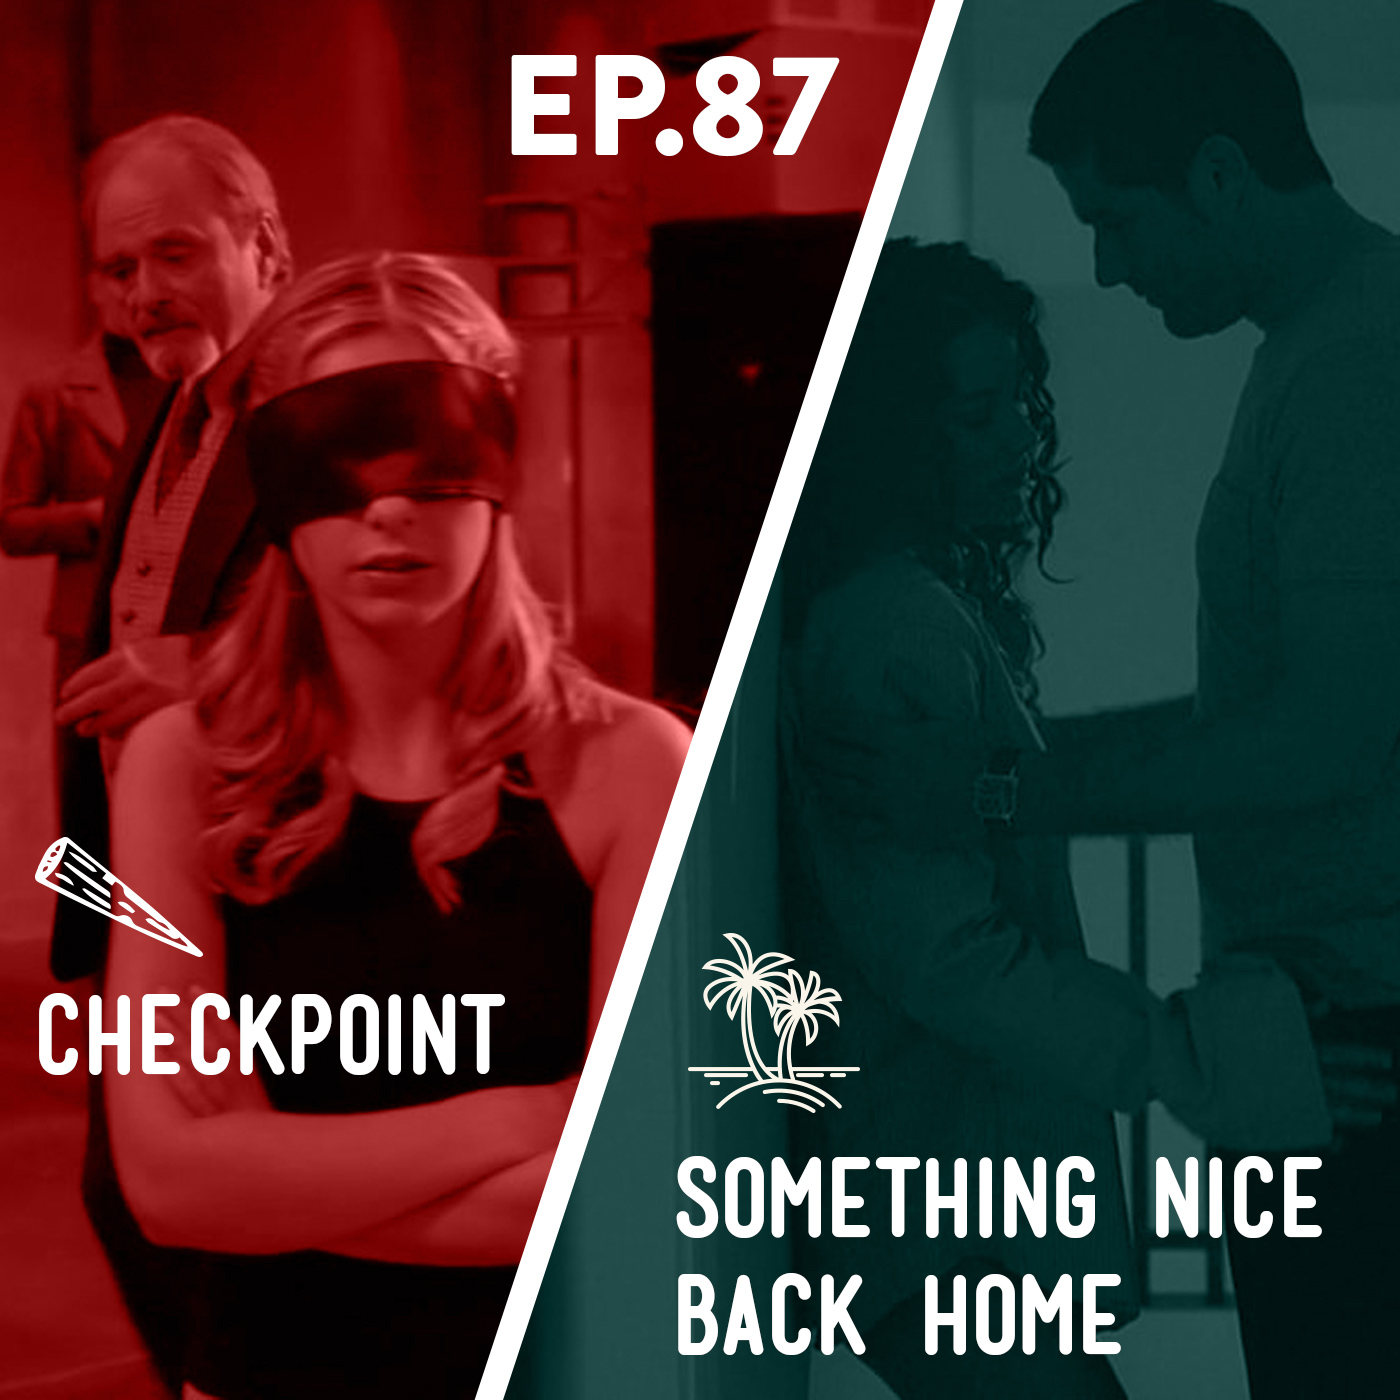 87 - Checkpoint / Something Nice Back Home Image